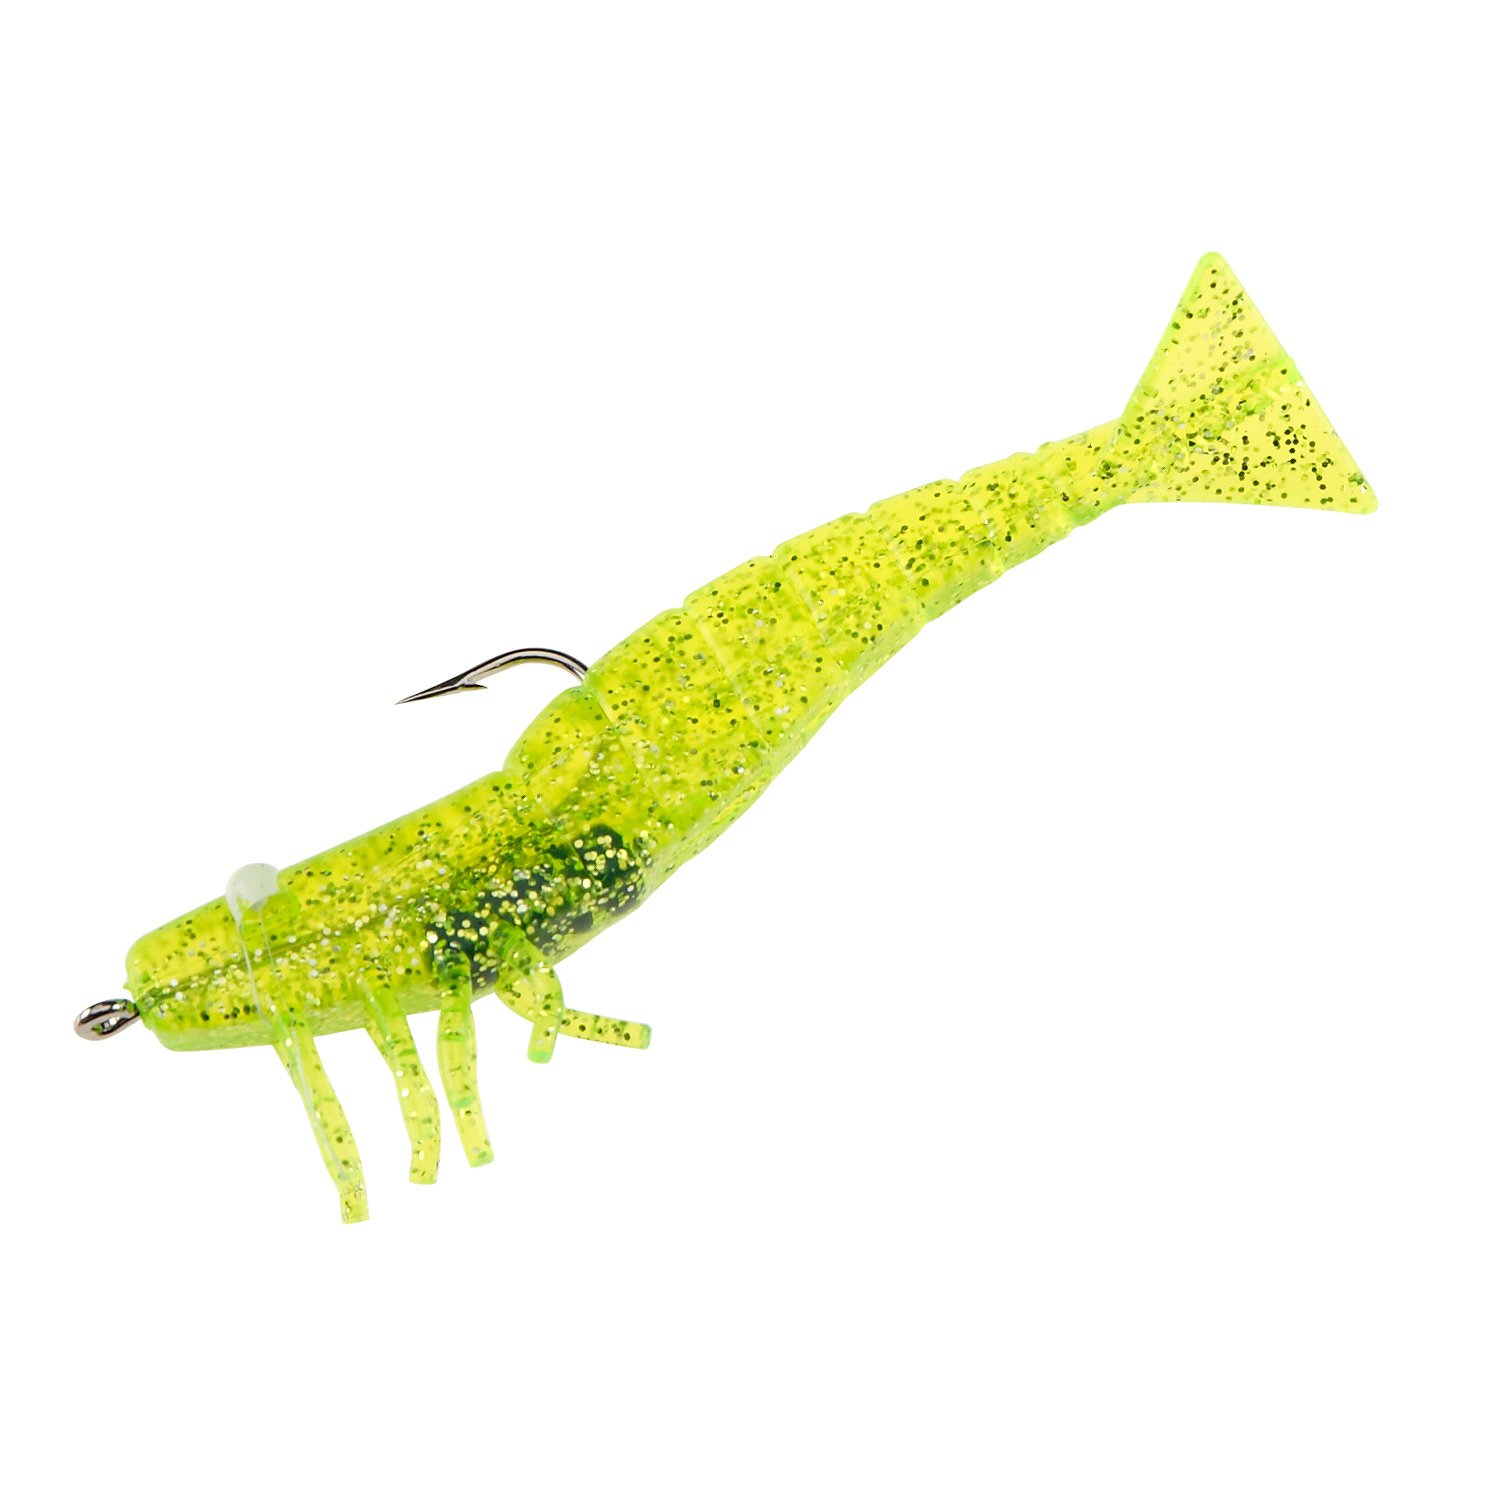 Academy Sports + Outdoors D.O.A. Fishing Lures 3 Standard Shrimp Rigged  Plastic Swimbaits 3-Pack